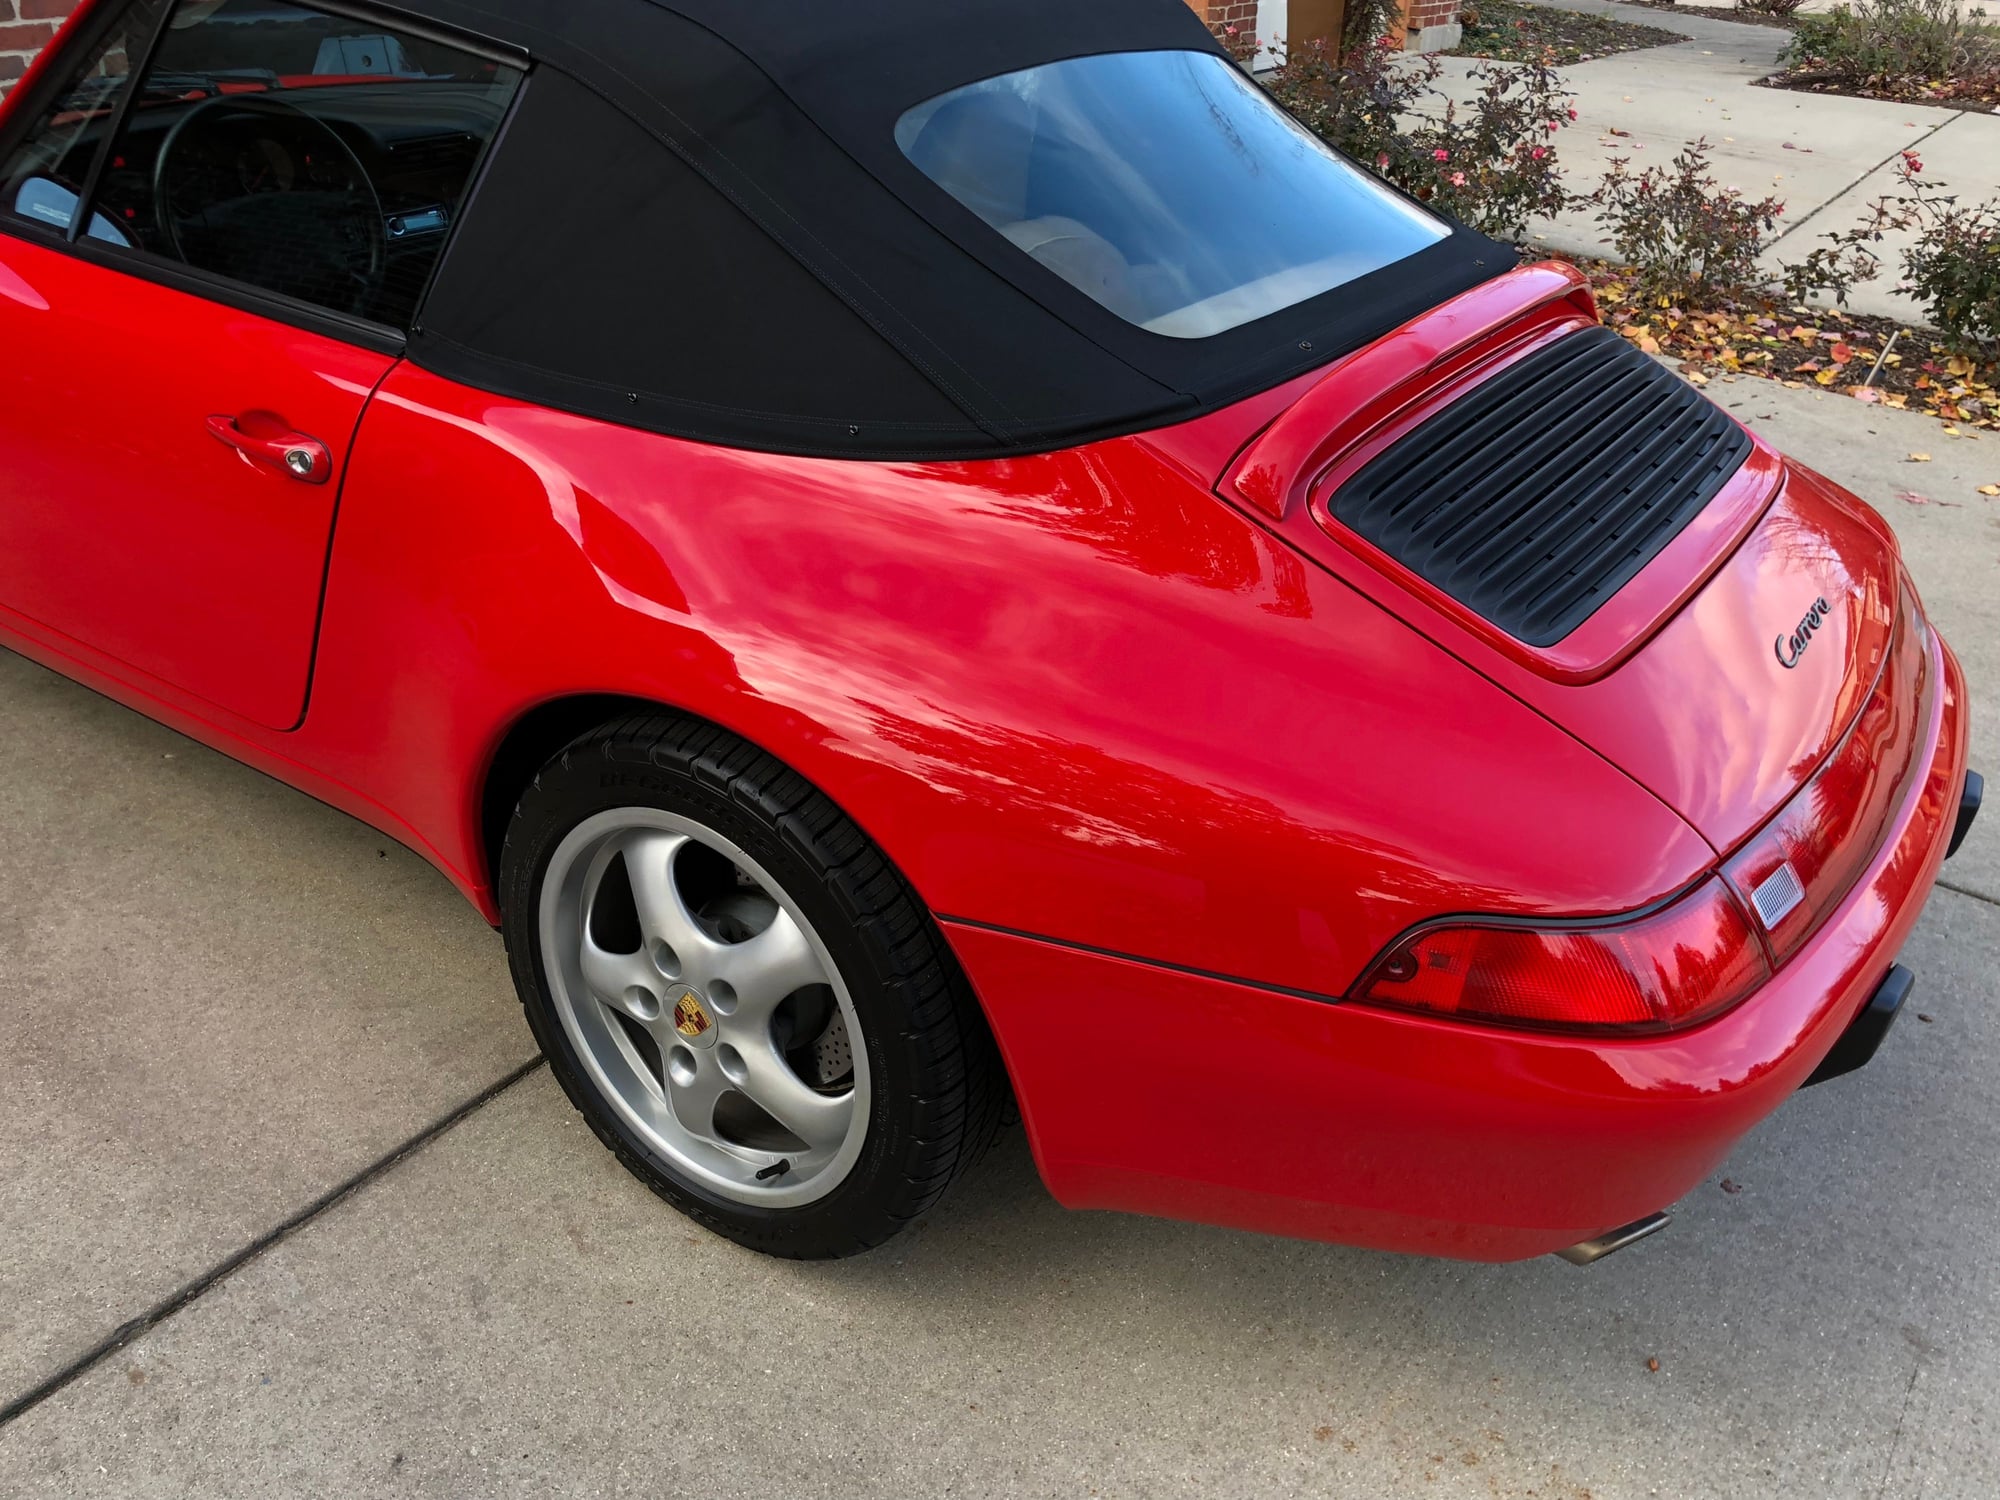 1995 Porsche 911 - 1995 Porsche 911 Carrera Cab 6spd 28k Miles! - Used - VIN WP0CB29985S340950 - 27,892 Miles - 6 cyl - 2WD - Manual - Convertible - Red - Bloomingdale, IL 60108, United States